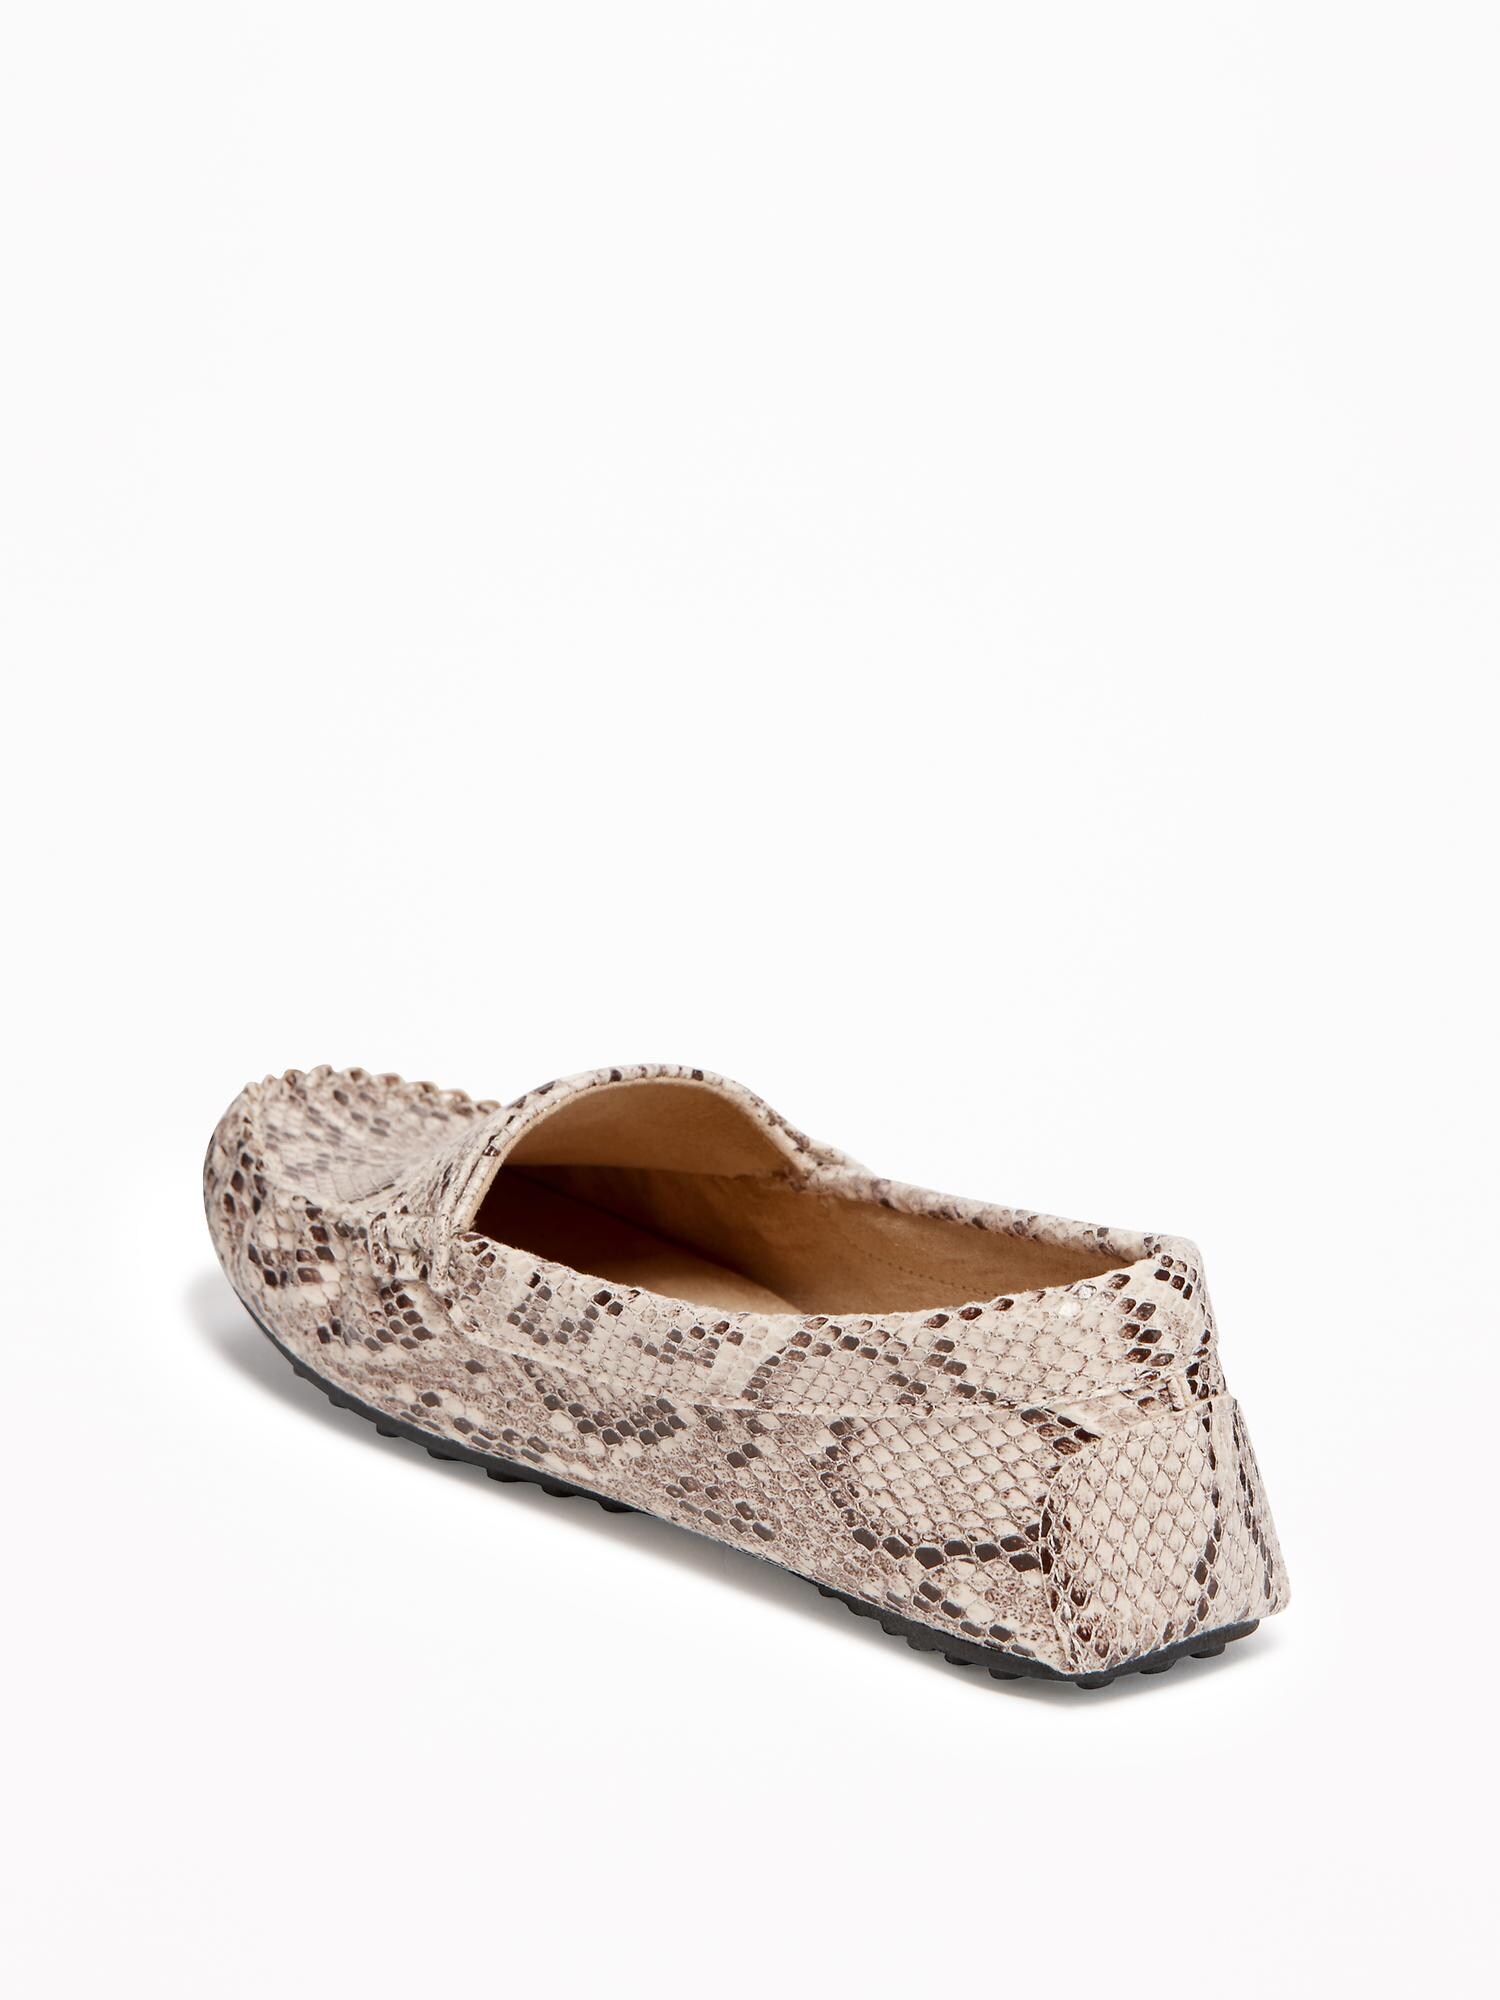 Faux-Leather Snake-Print Driving Moccasins for Women | Old Navy